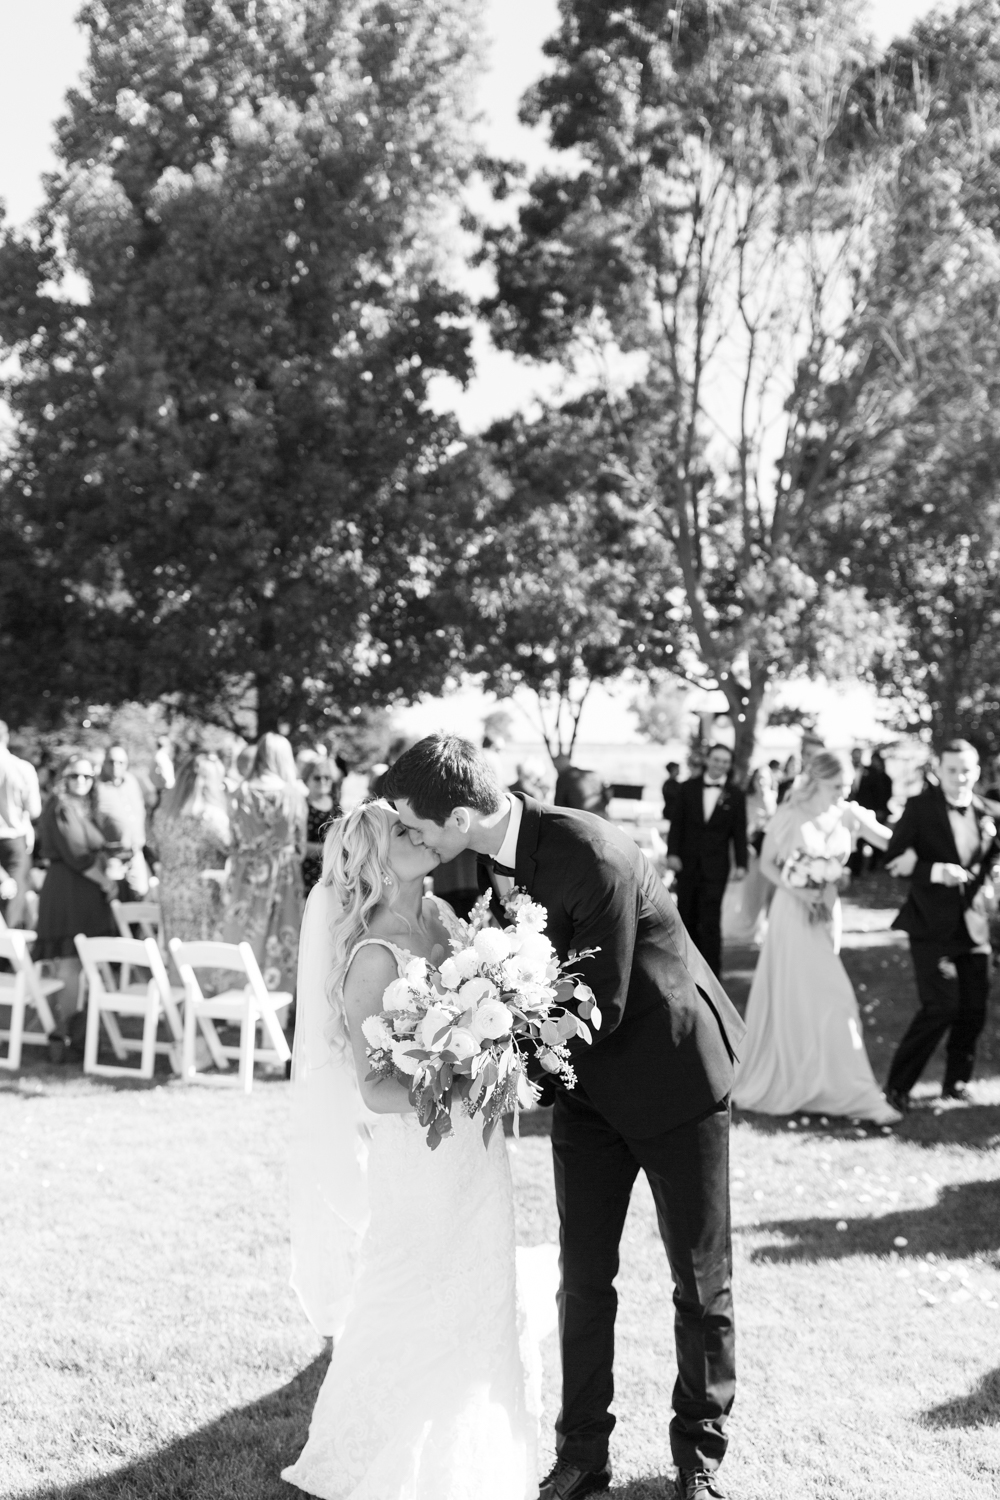 bride and groom kissing at end of aisle after wedding ceremony black and white photo elegant backyard wedding photos